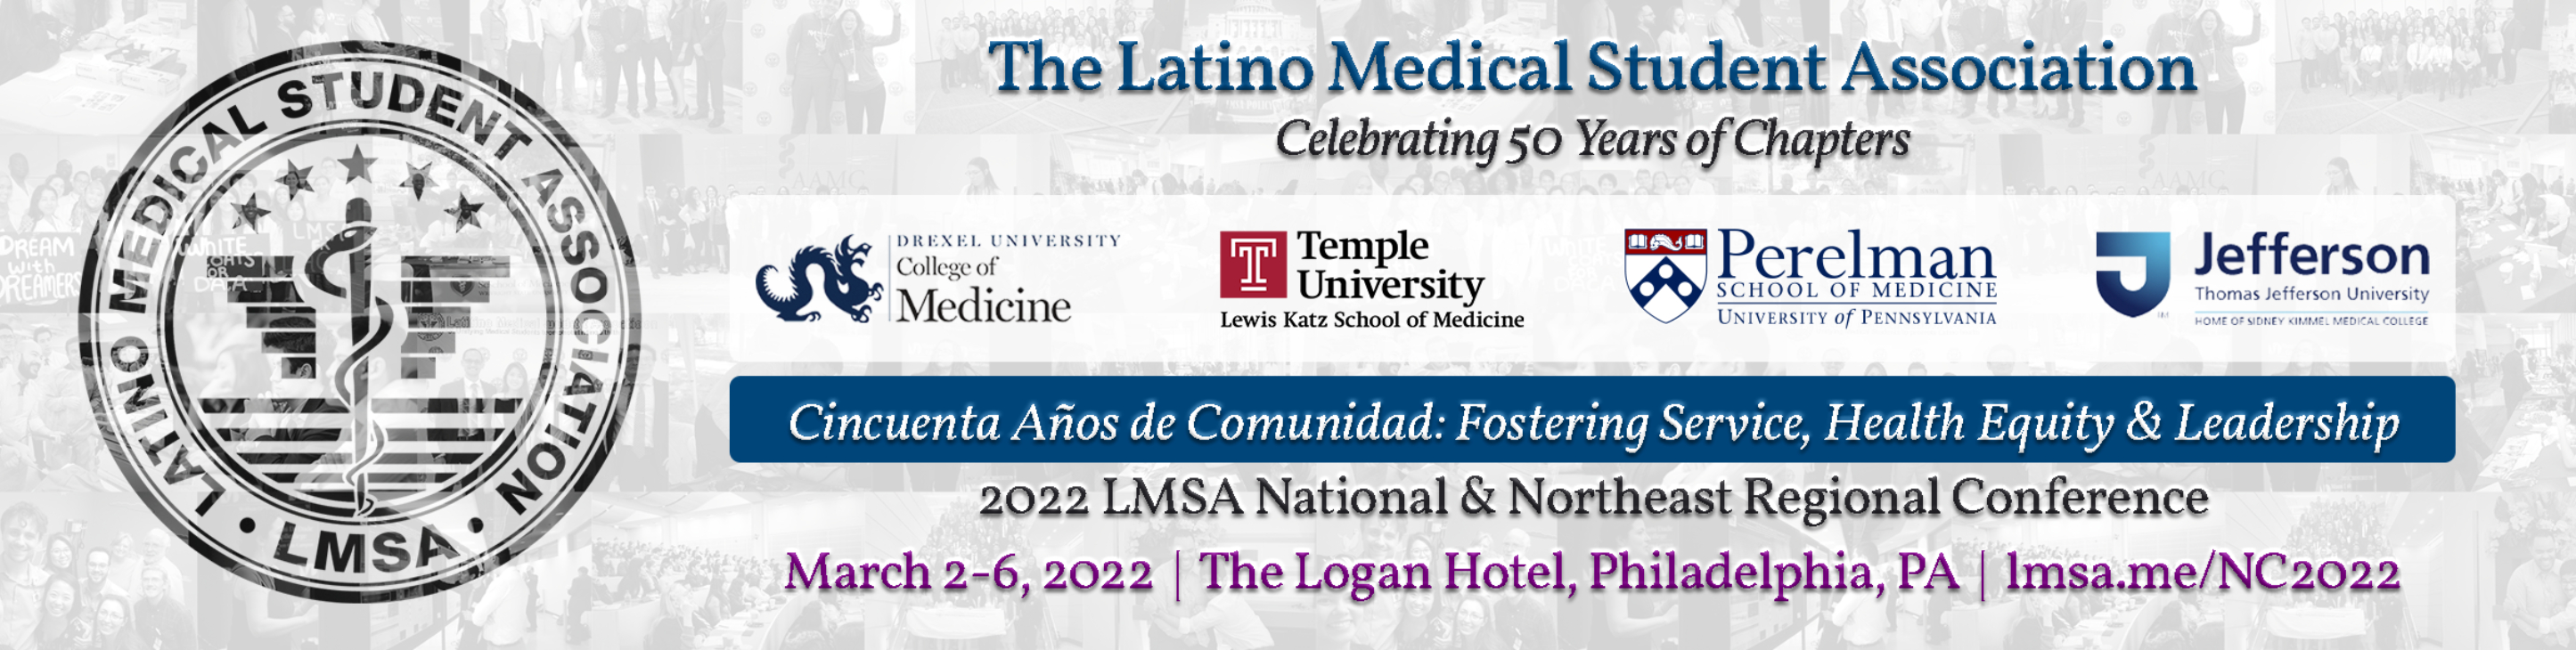 LMSA conference banner. Photo courtesy of: LMSA national website